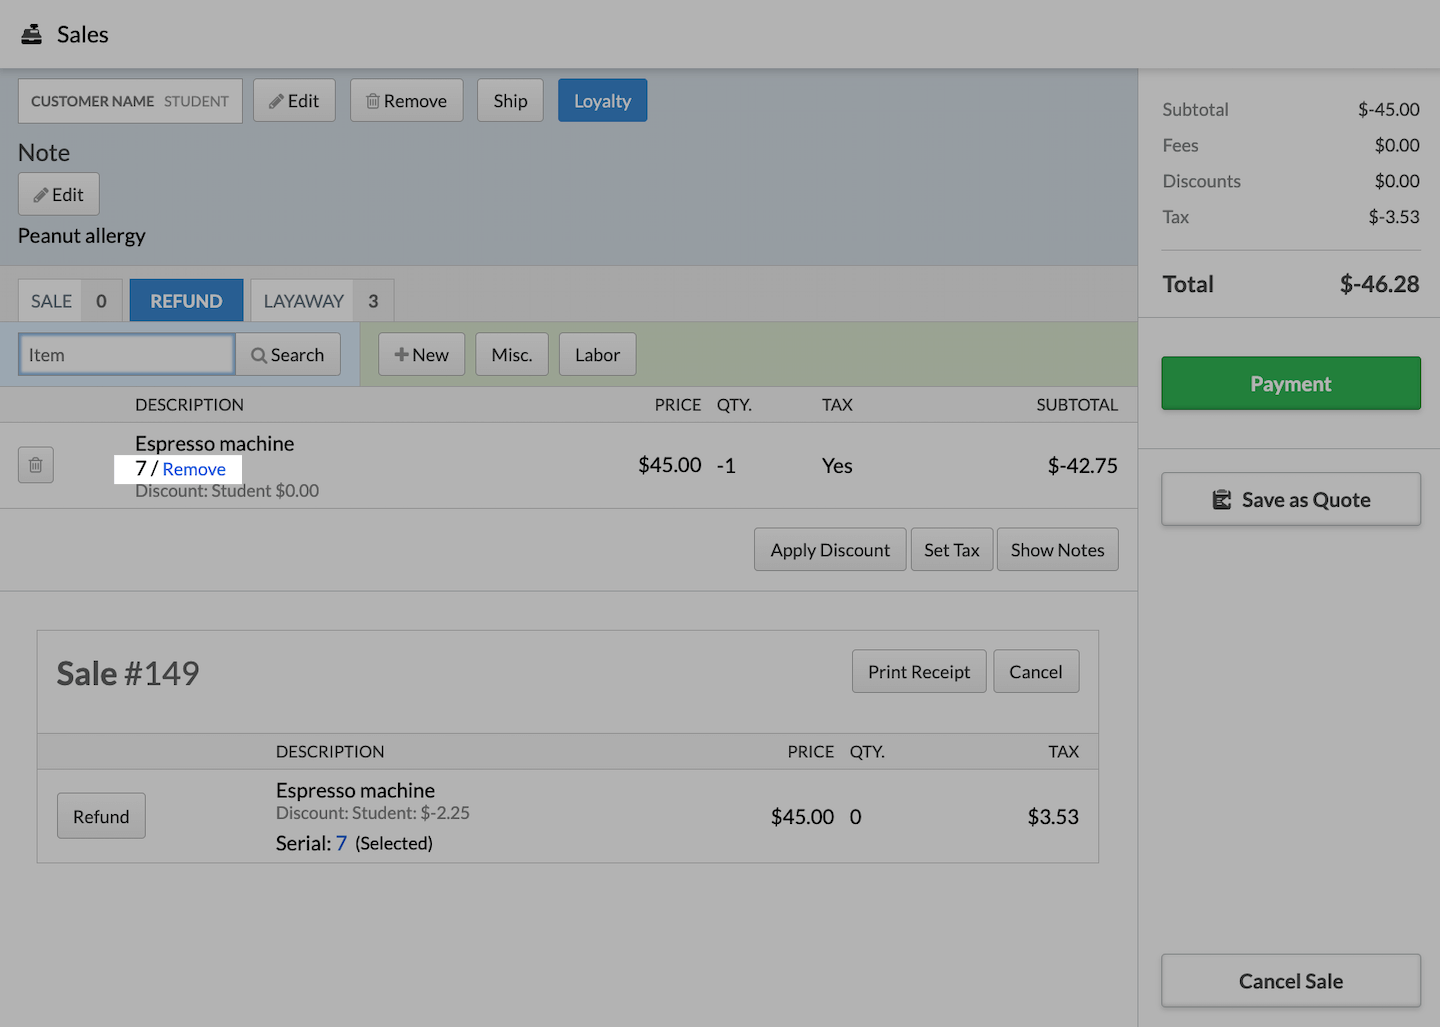 Refund tab with serialized item added and Remove option emphasized.